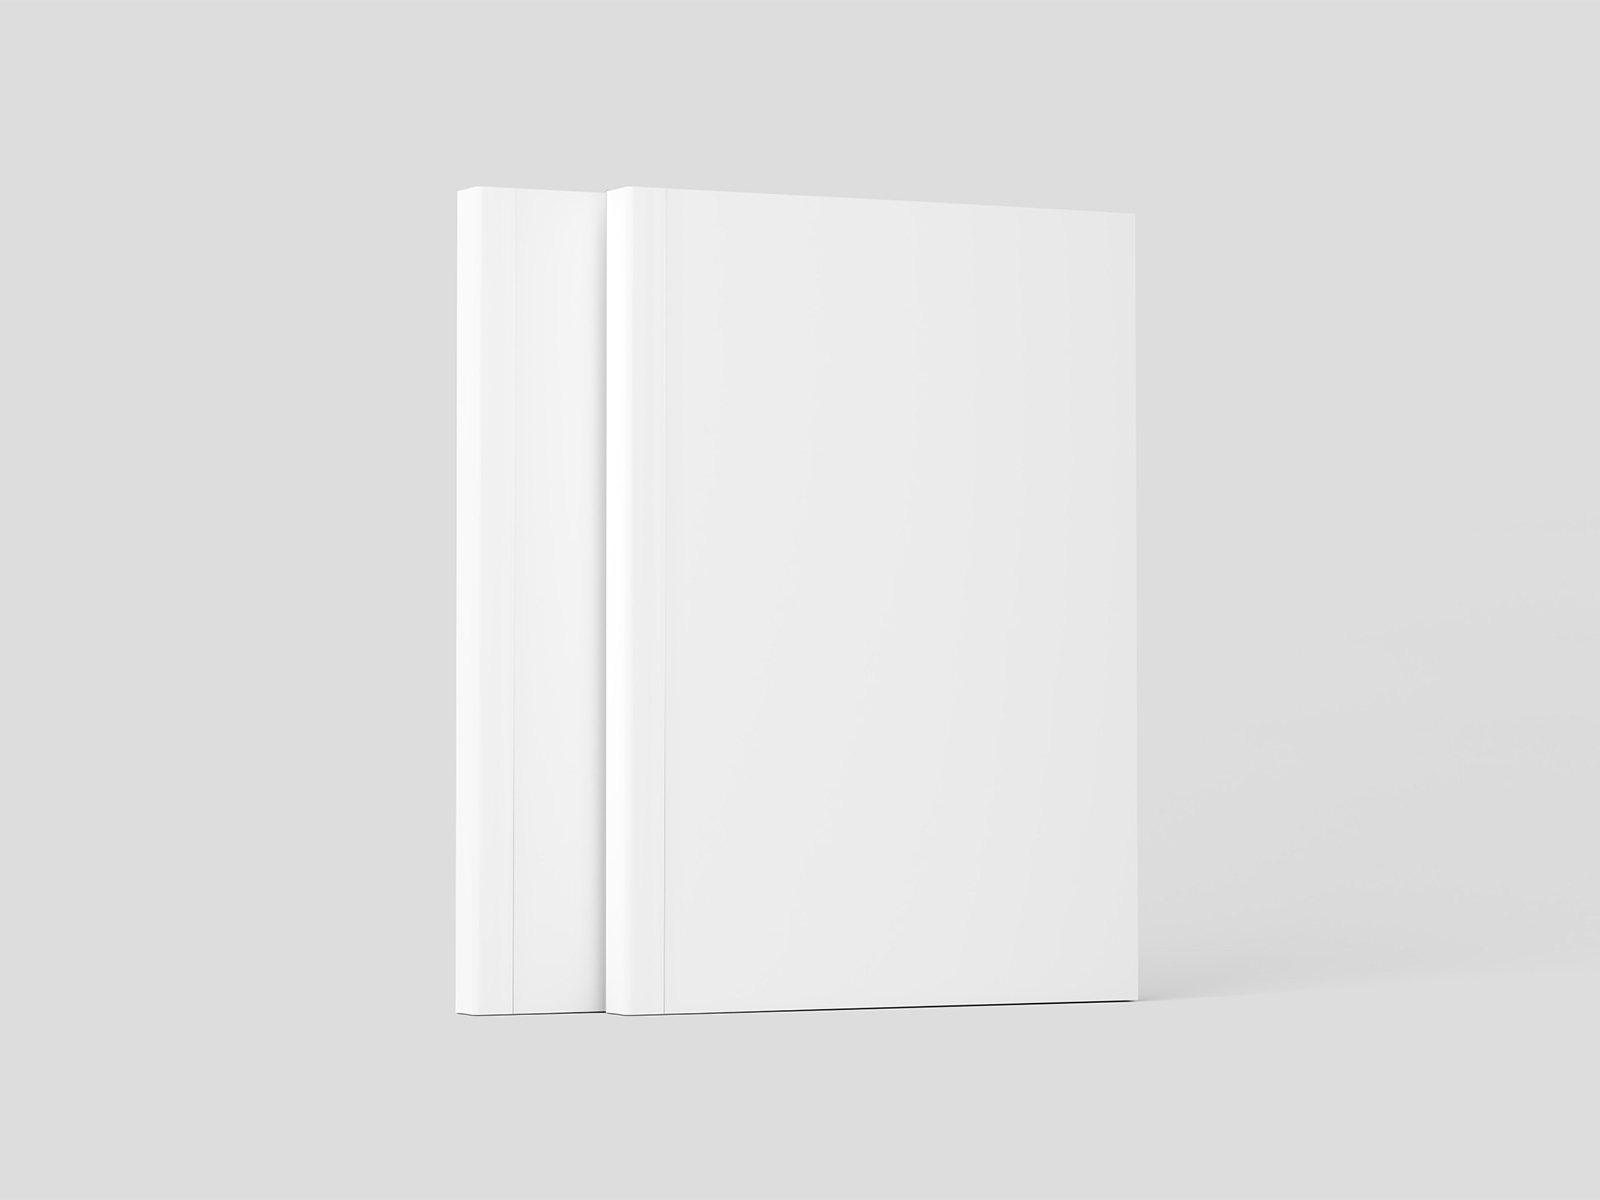 Free Softcover Book Mockup Set